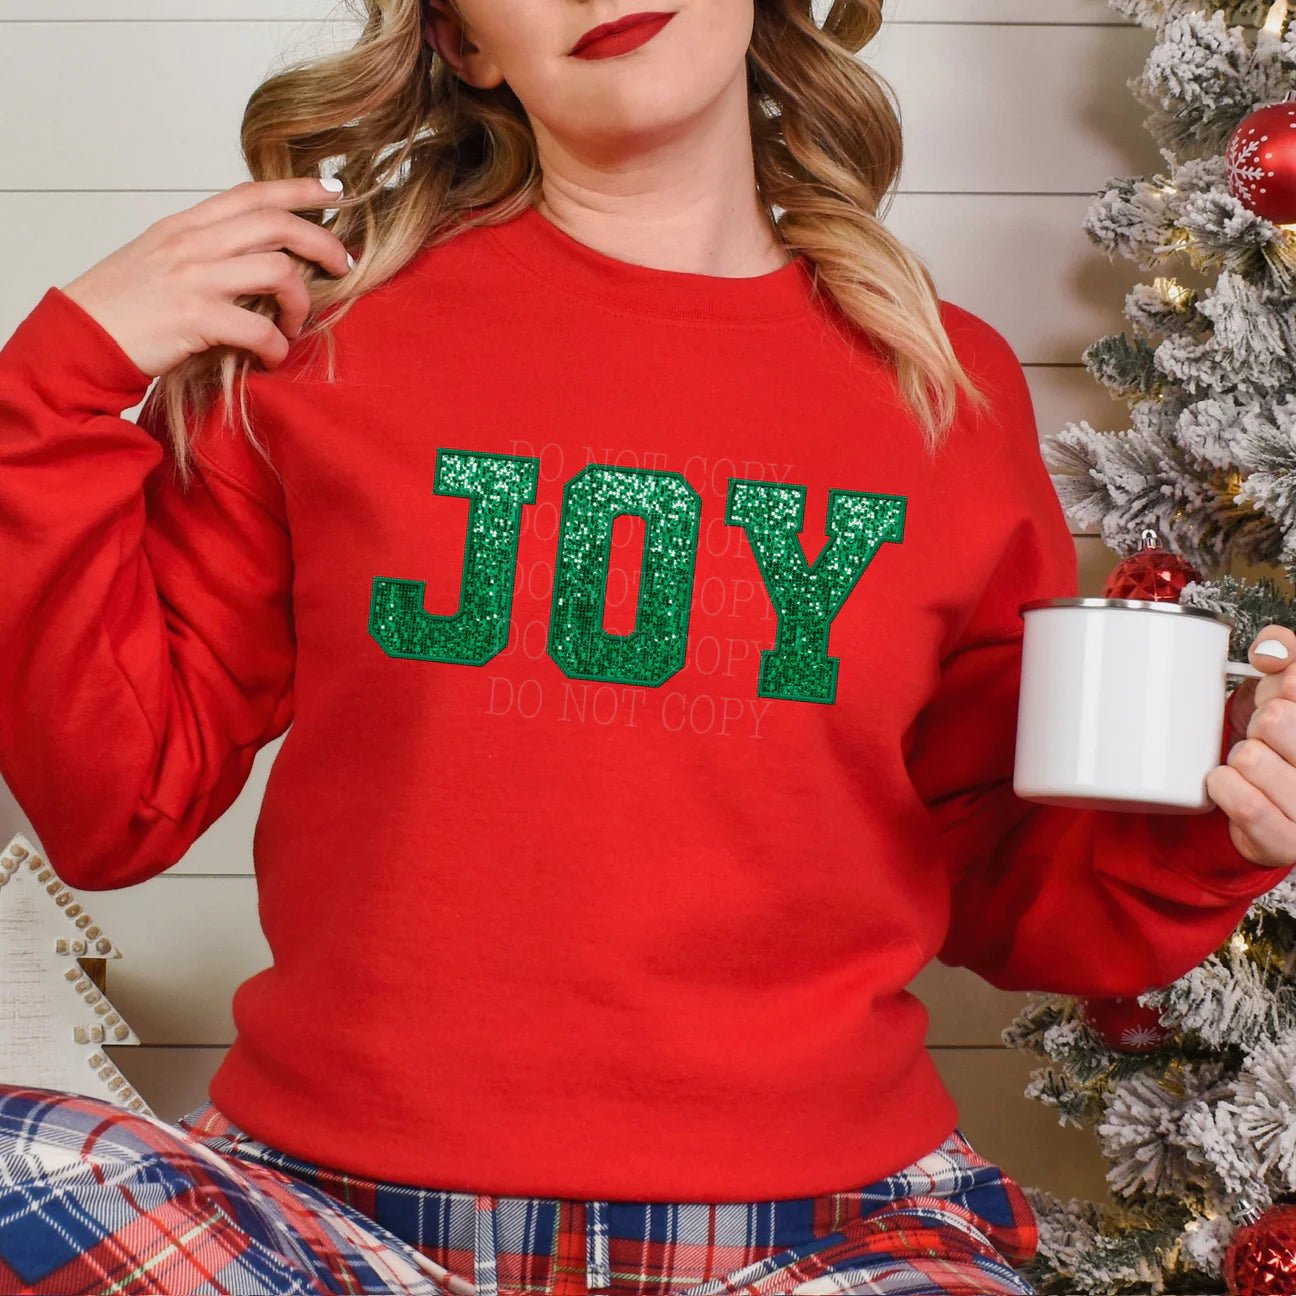 "Joy (Faux Sequin Embroidery)" Sweatshirt or T-shirt (shown on "Red")